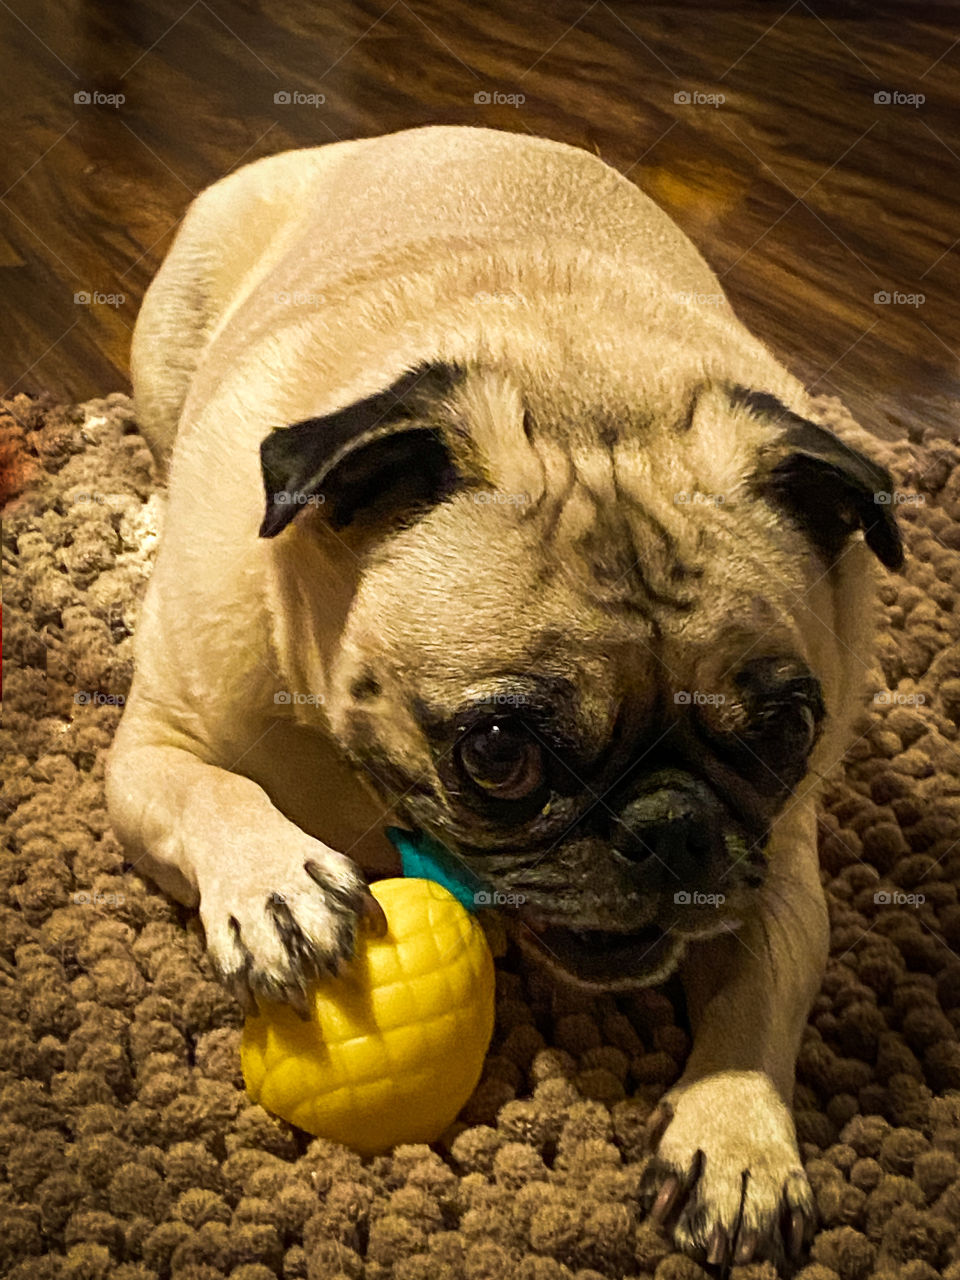 Izzy pug plays with her toy